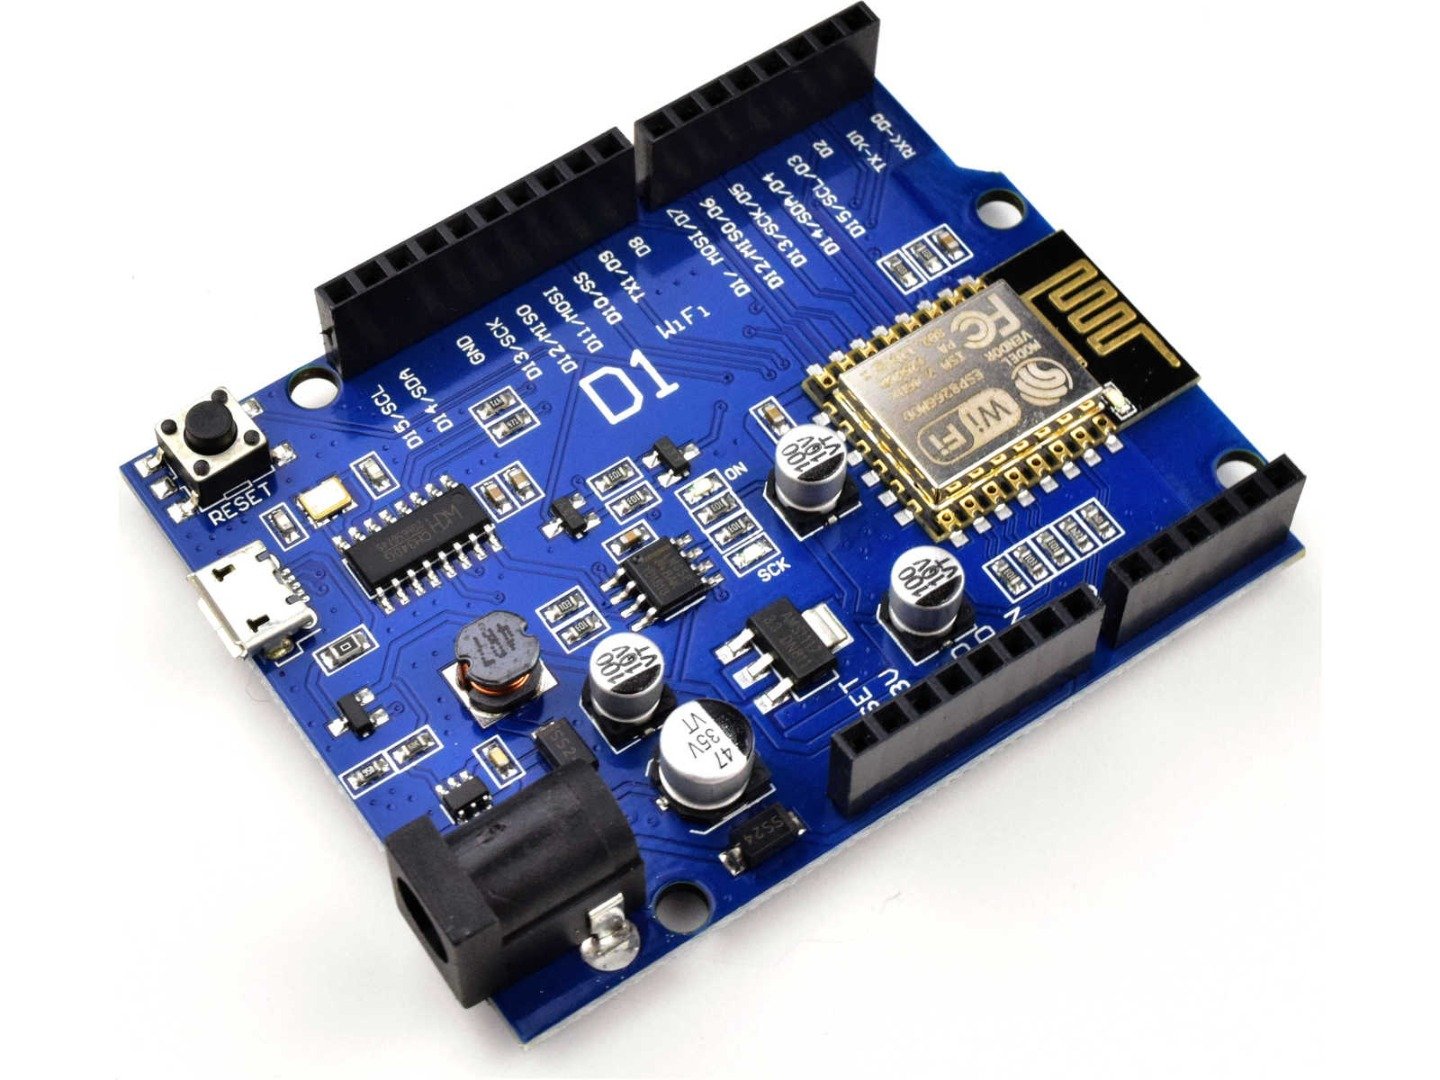 WEMOS D1 ESP8266 Wi-Fi Board 80-160MHz – IoT – compatible with Arduino and NodeMCU 11